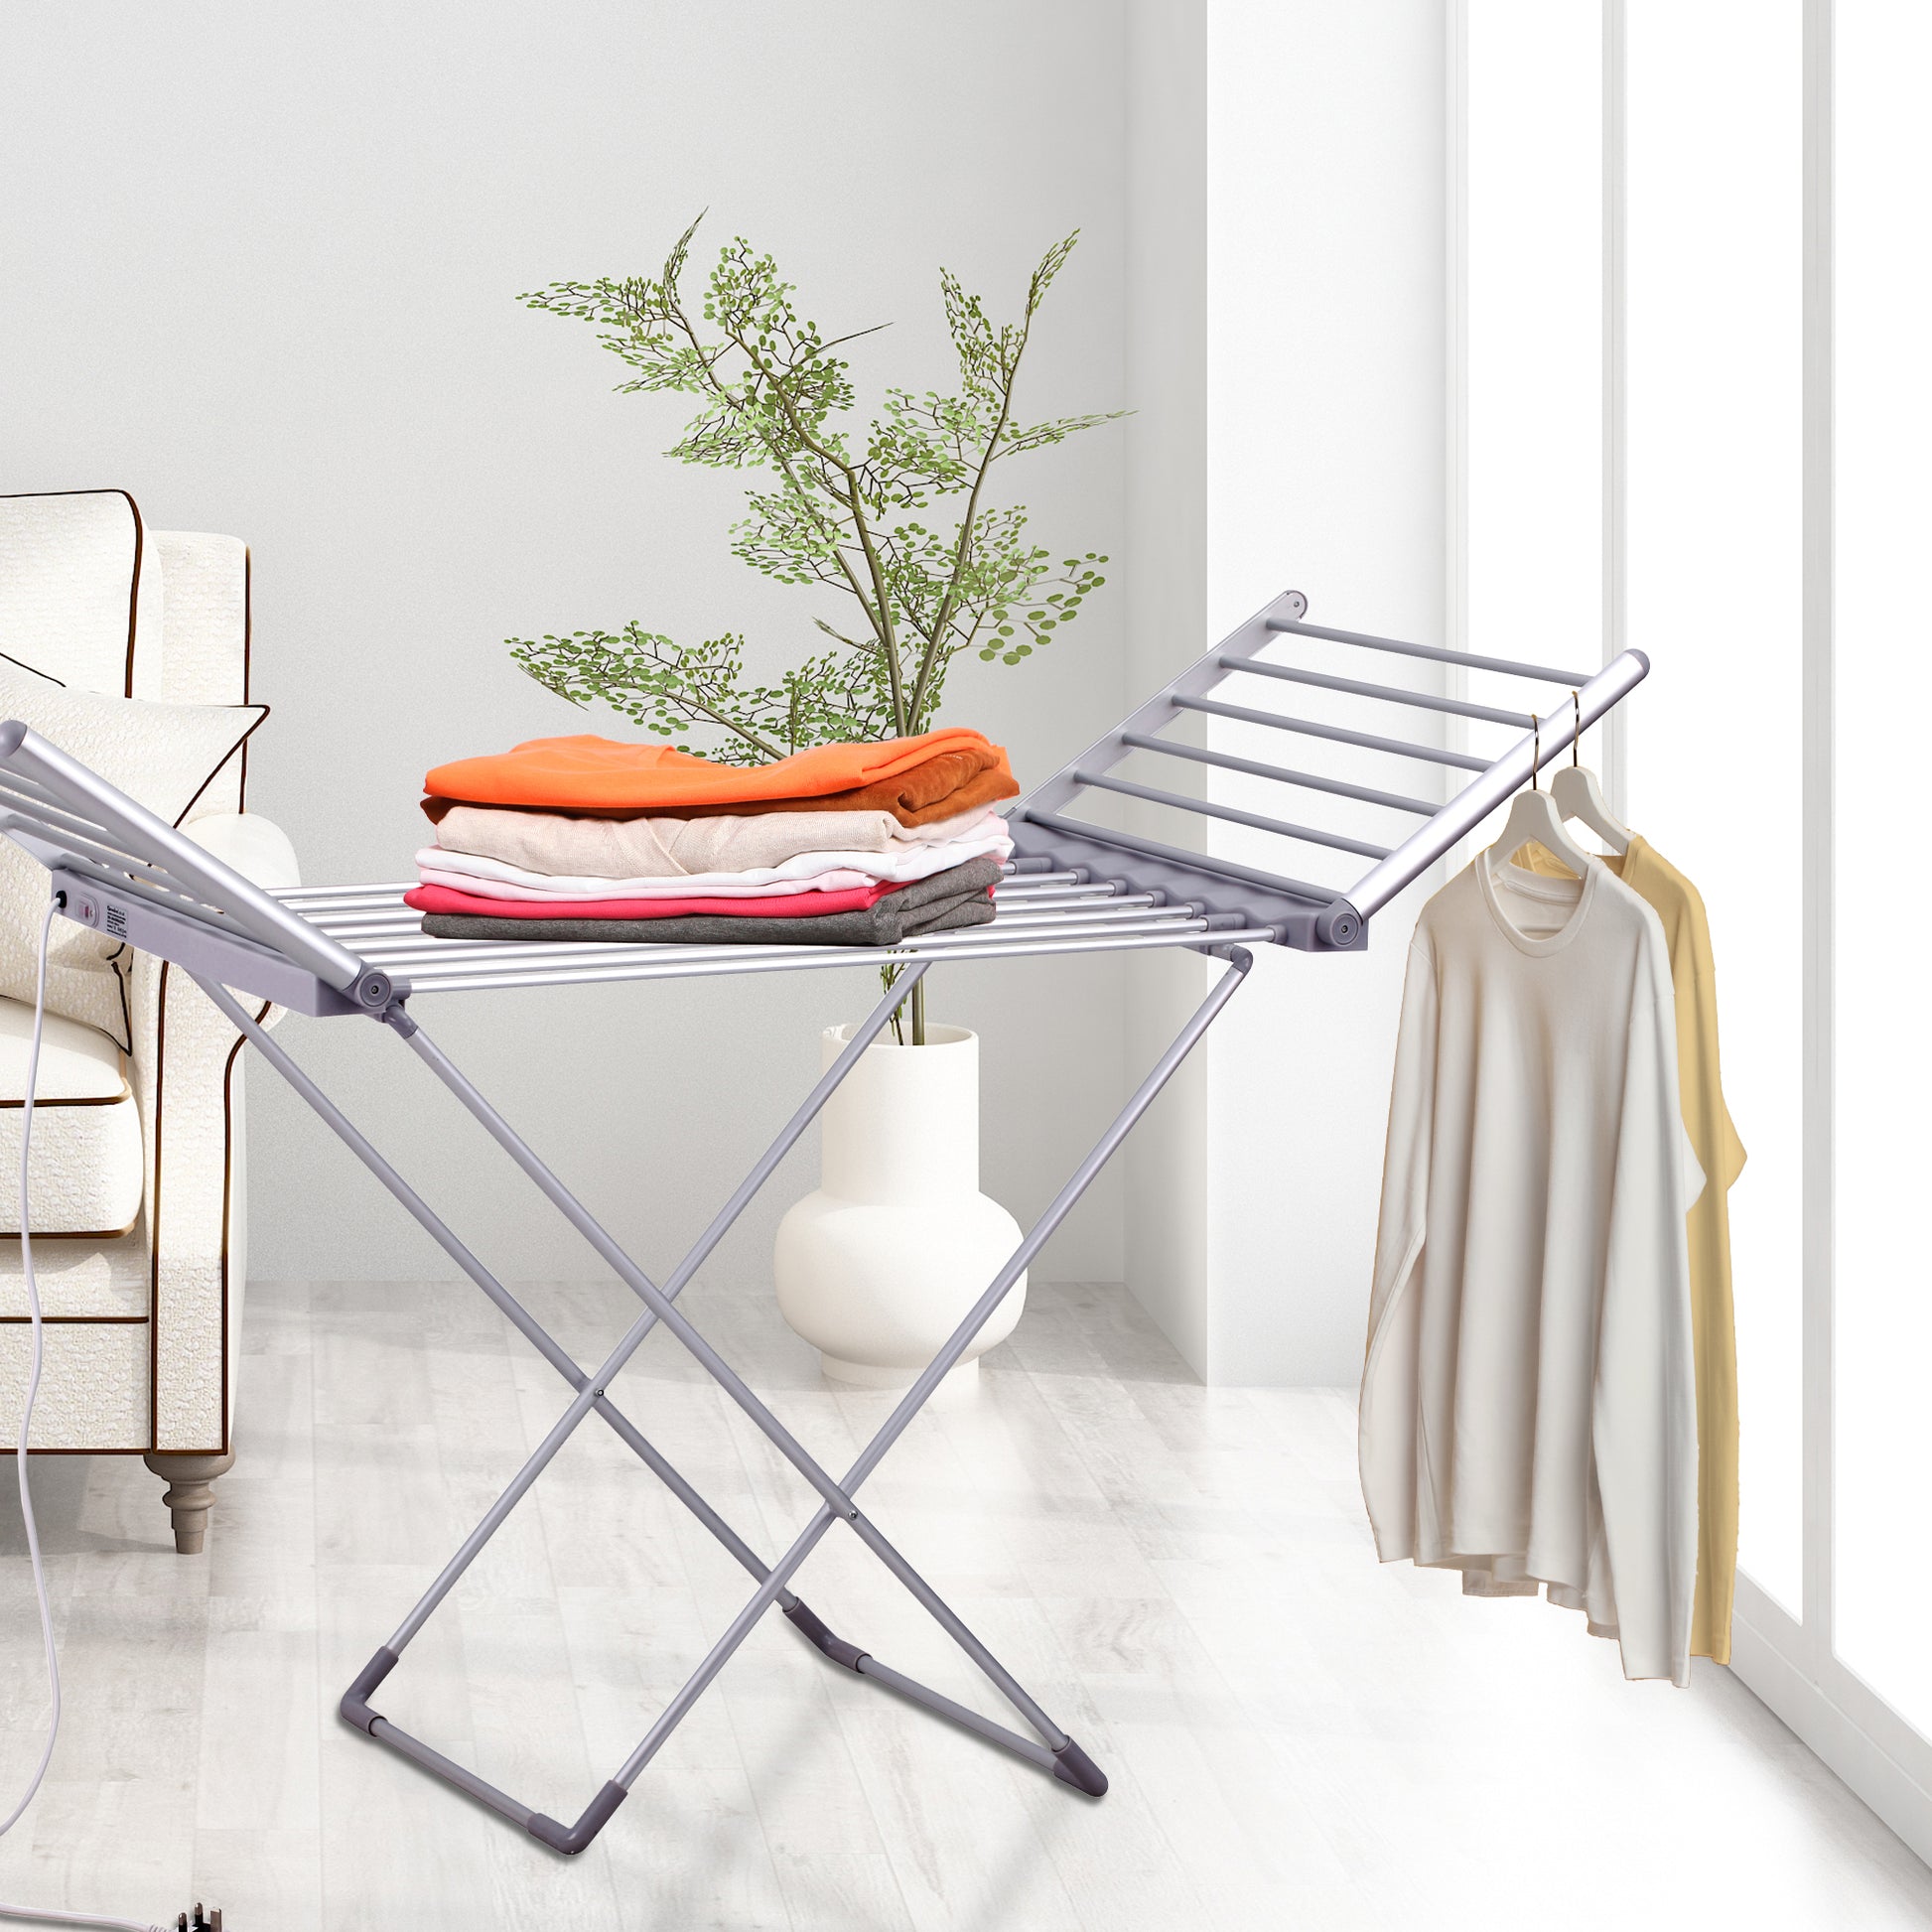 Aluminum Clothes Rack Dryer/Foldable X Wing Airer for Clothes